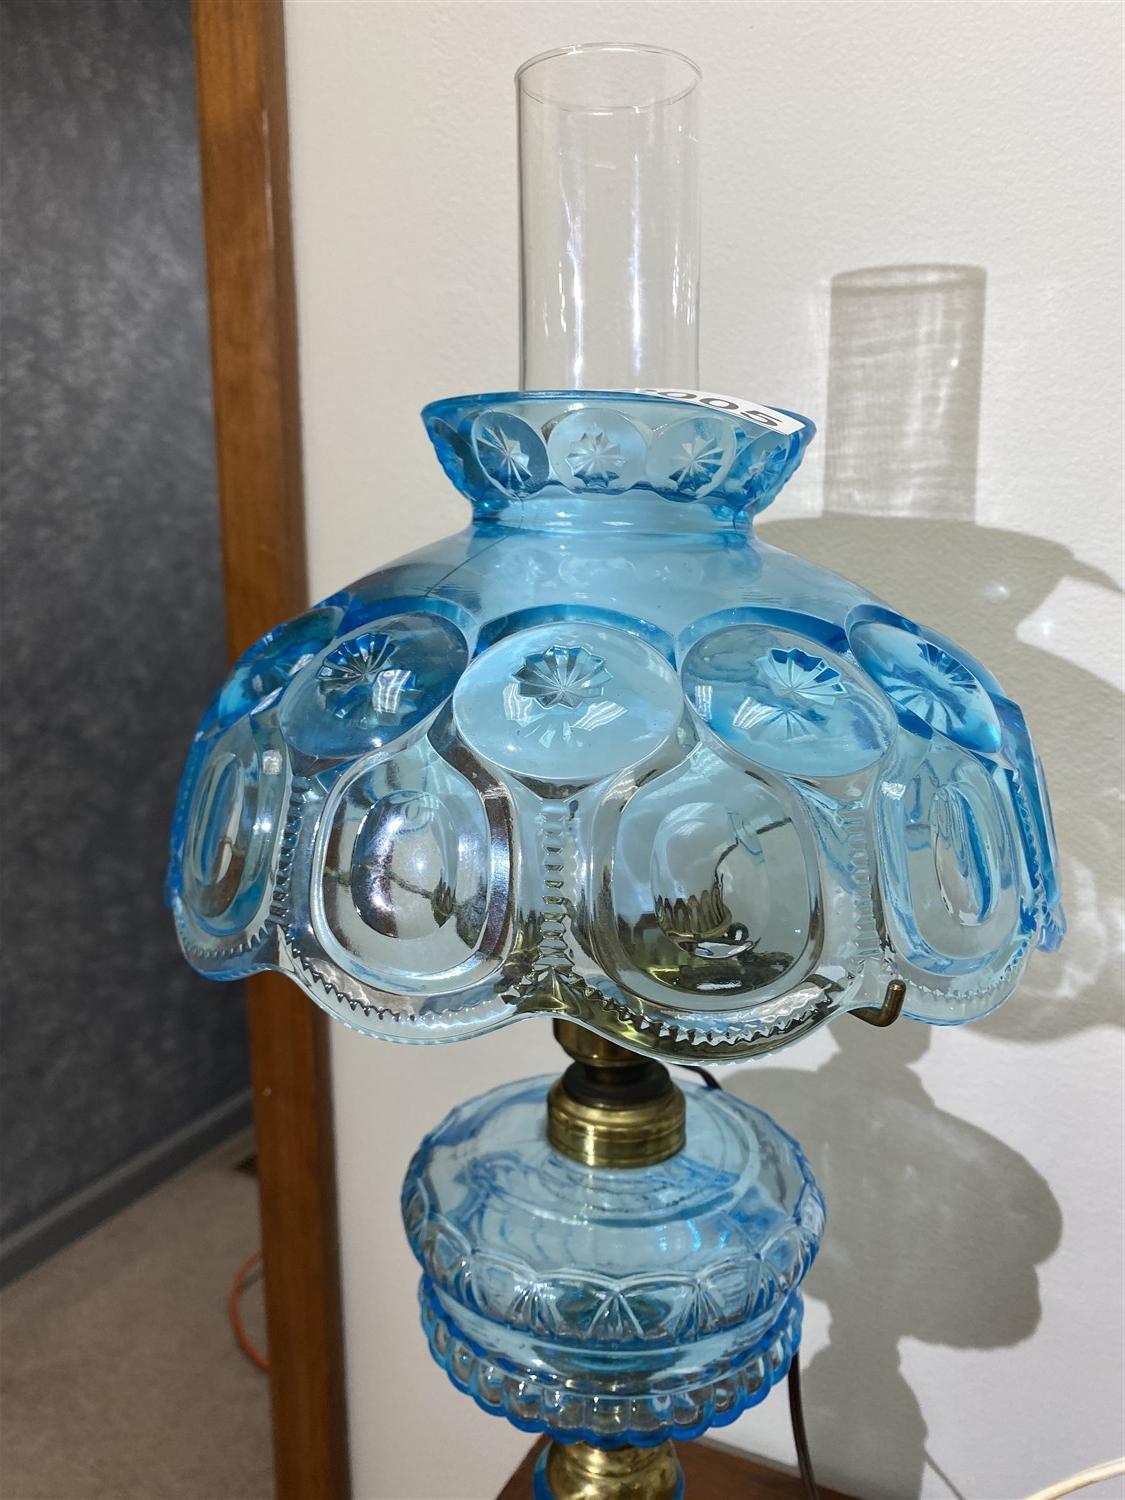 2 Antique Lamps - Blue and Milk Glass